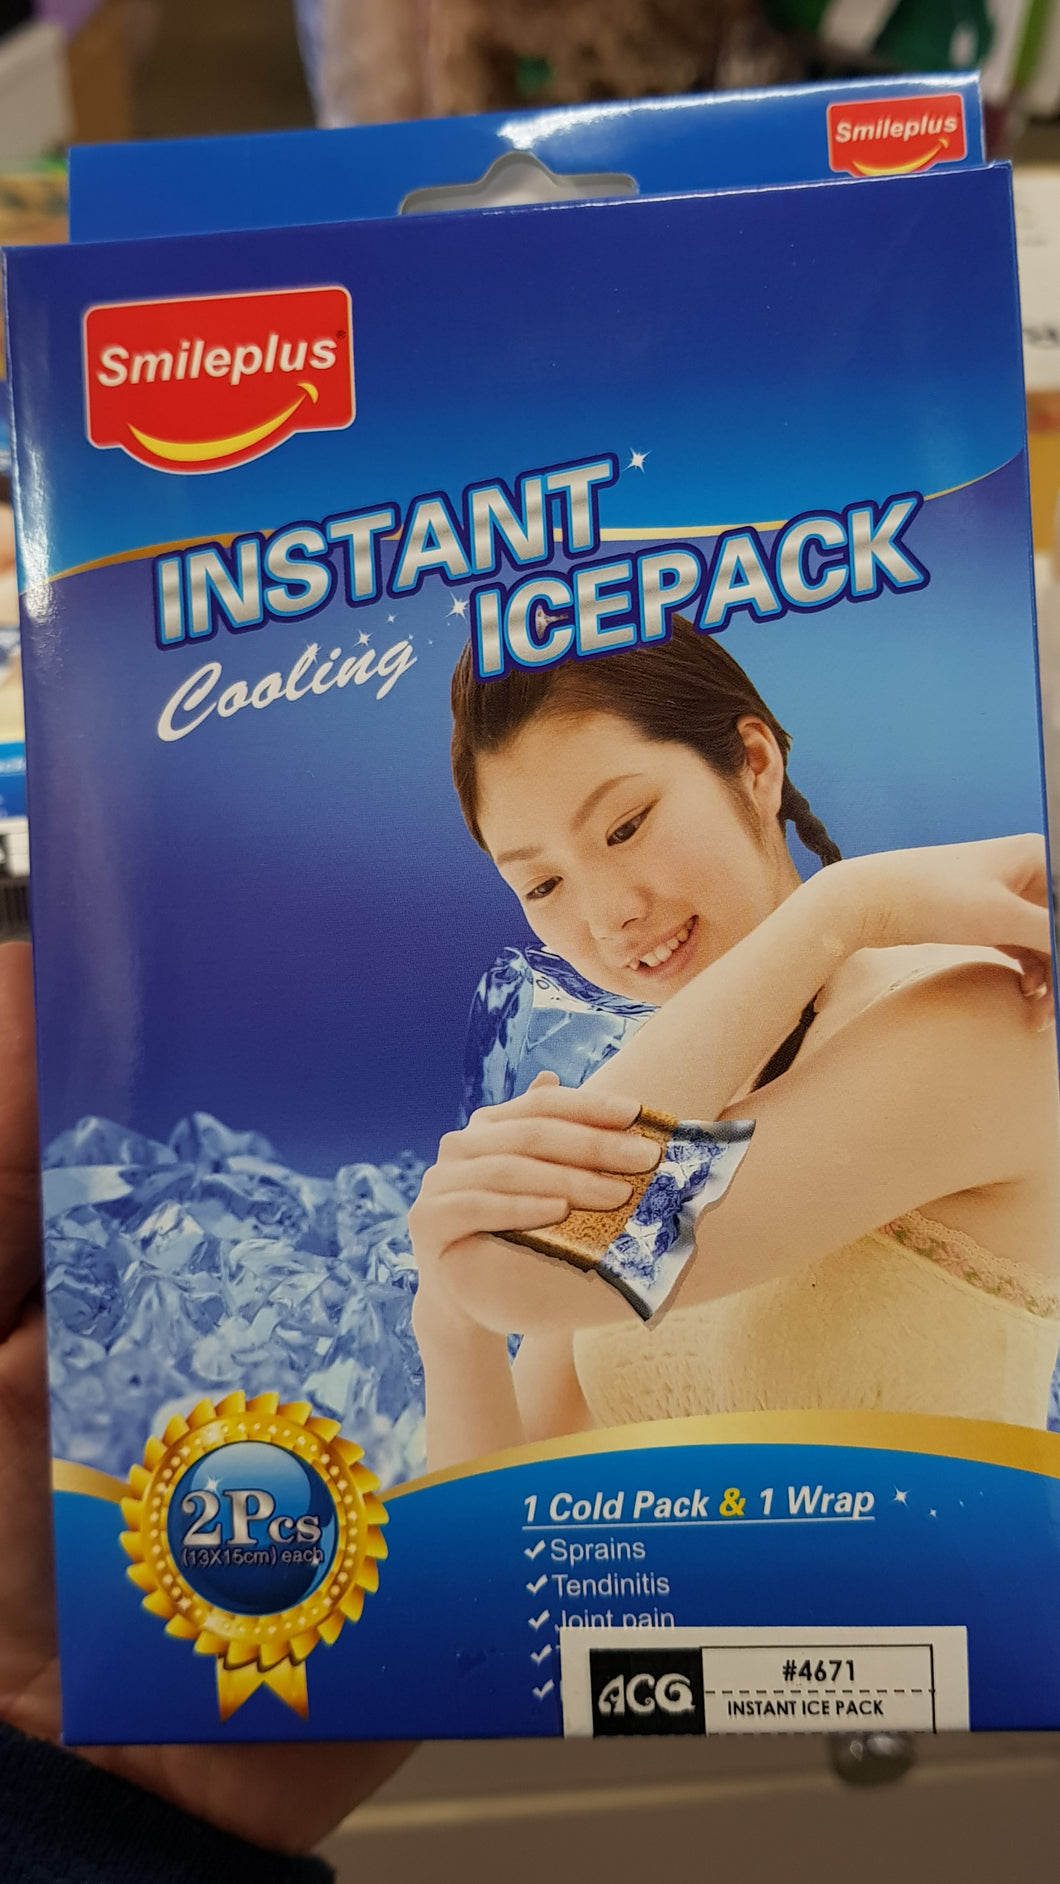 Instant pack